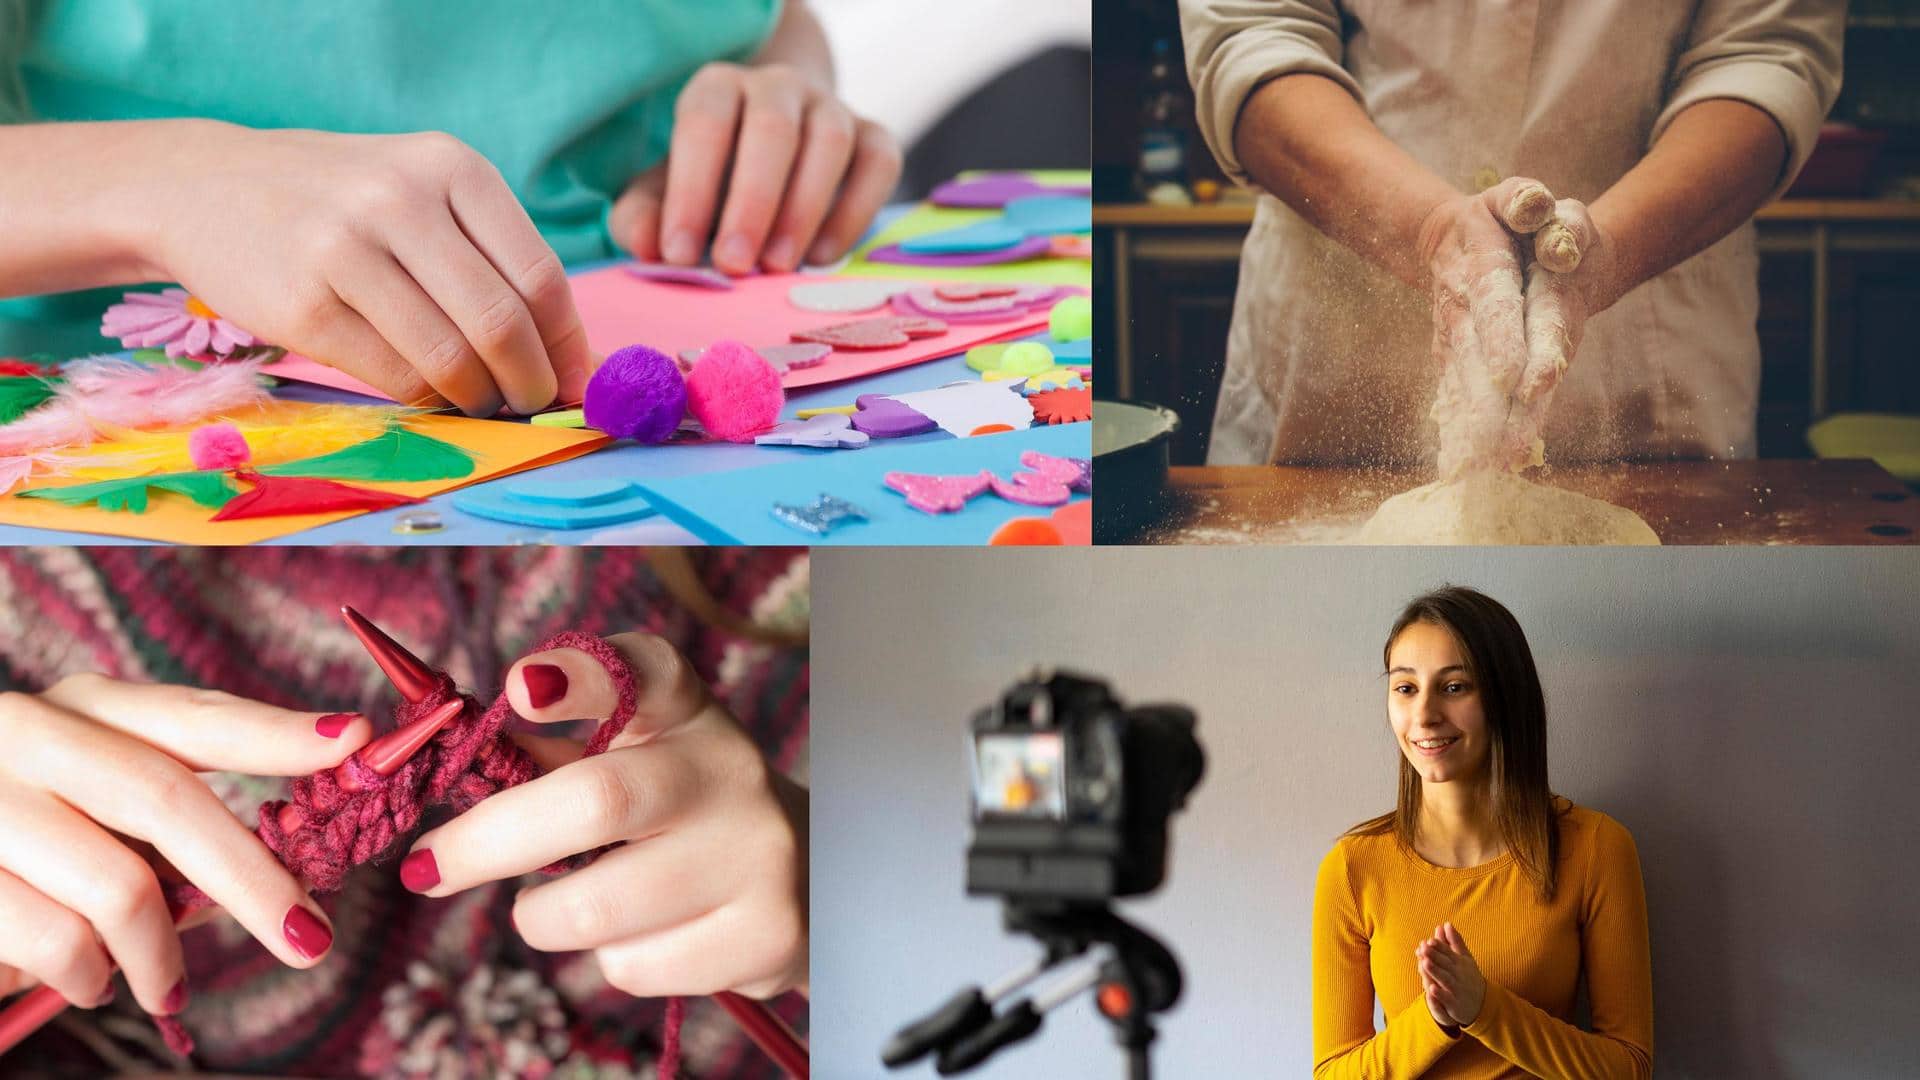 You can convert these 5 hobbies into serious business